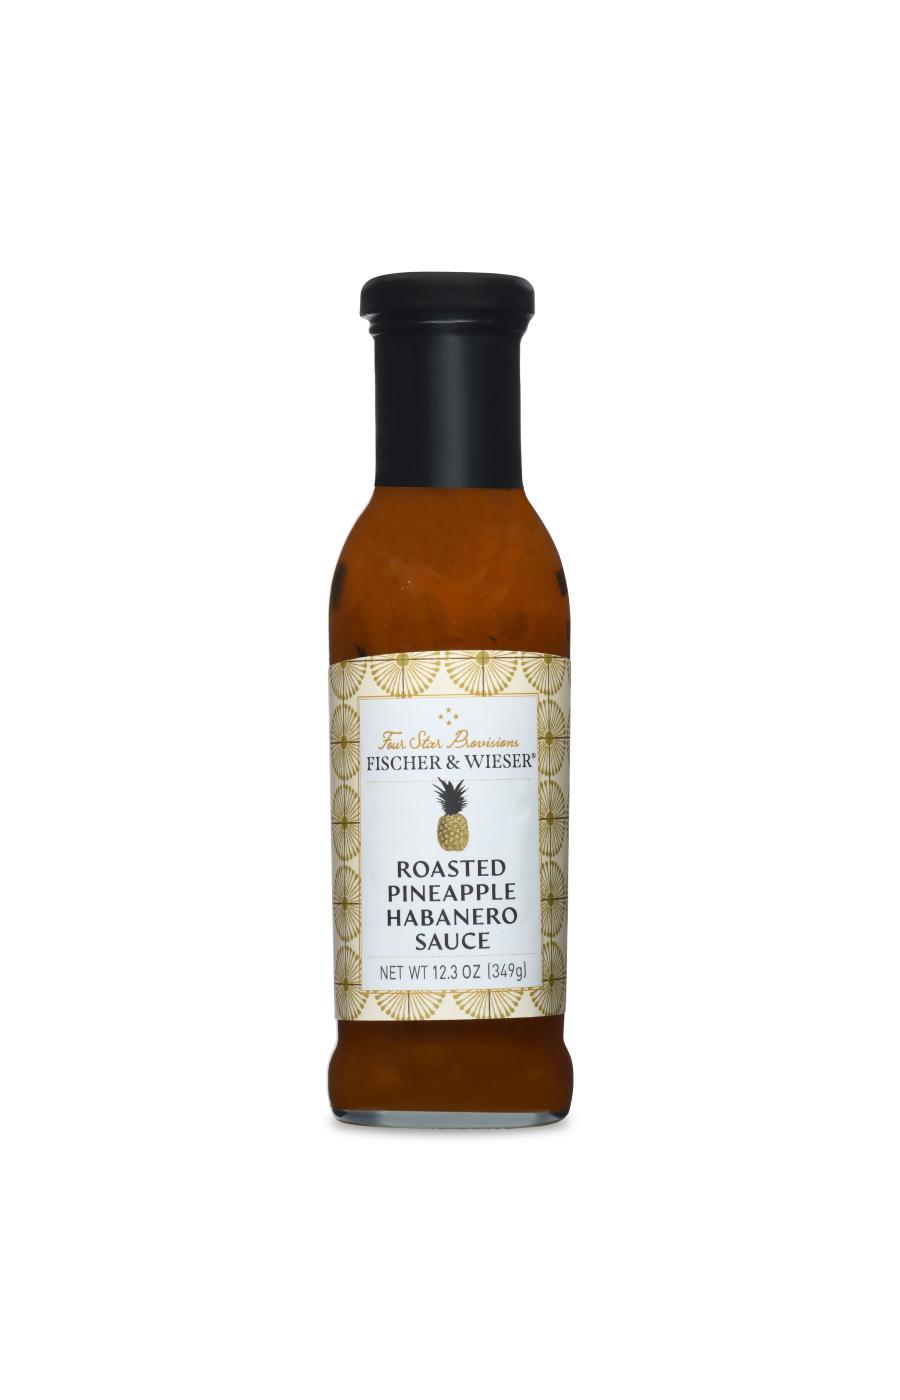 Fischer & Wieser Four Star Provisions Roasted Pineapple Habanero Sauce; image 1 of 2